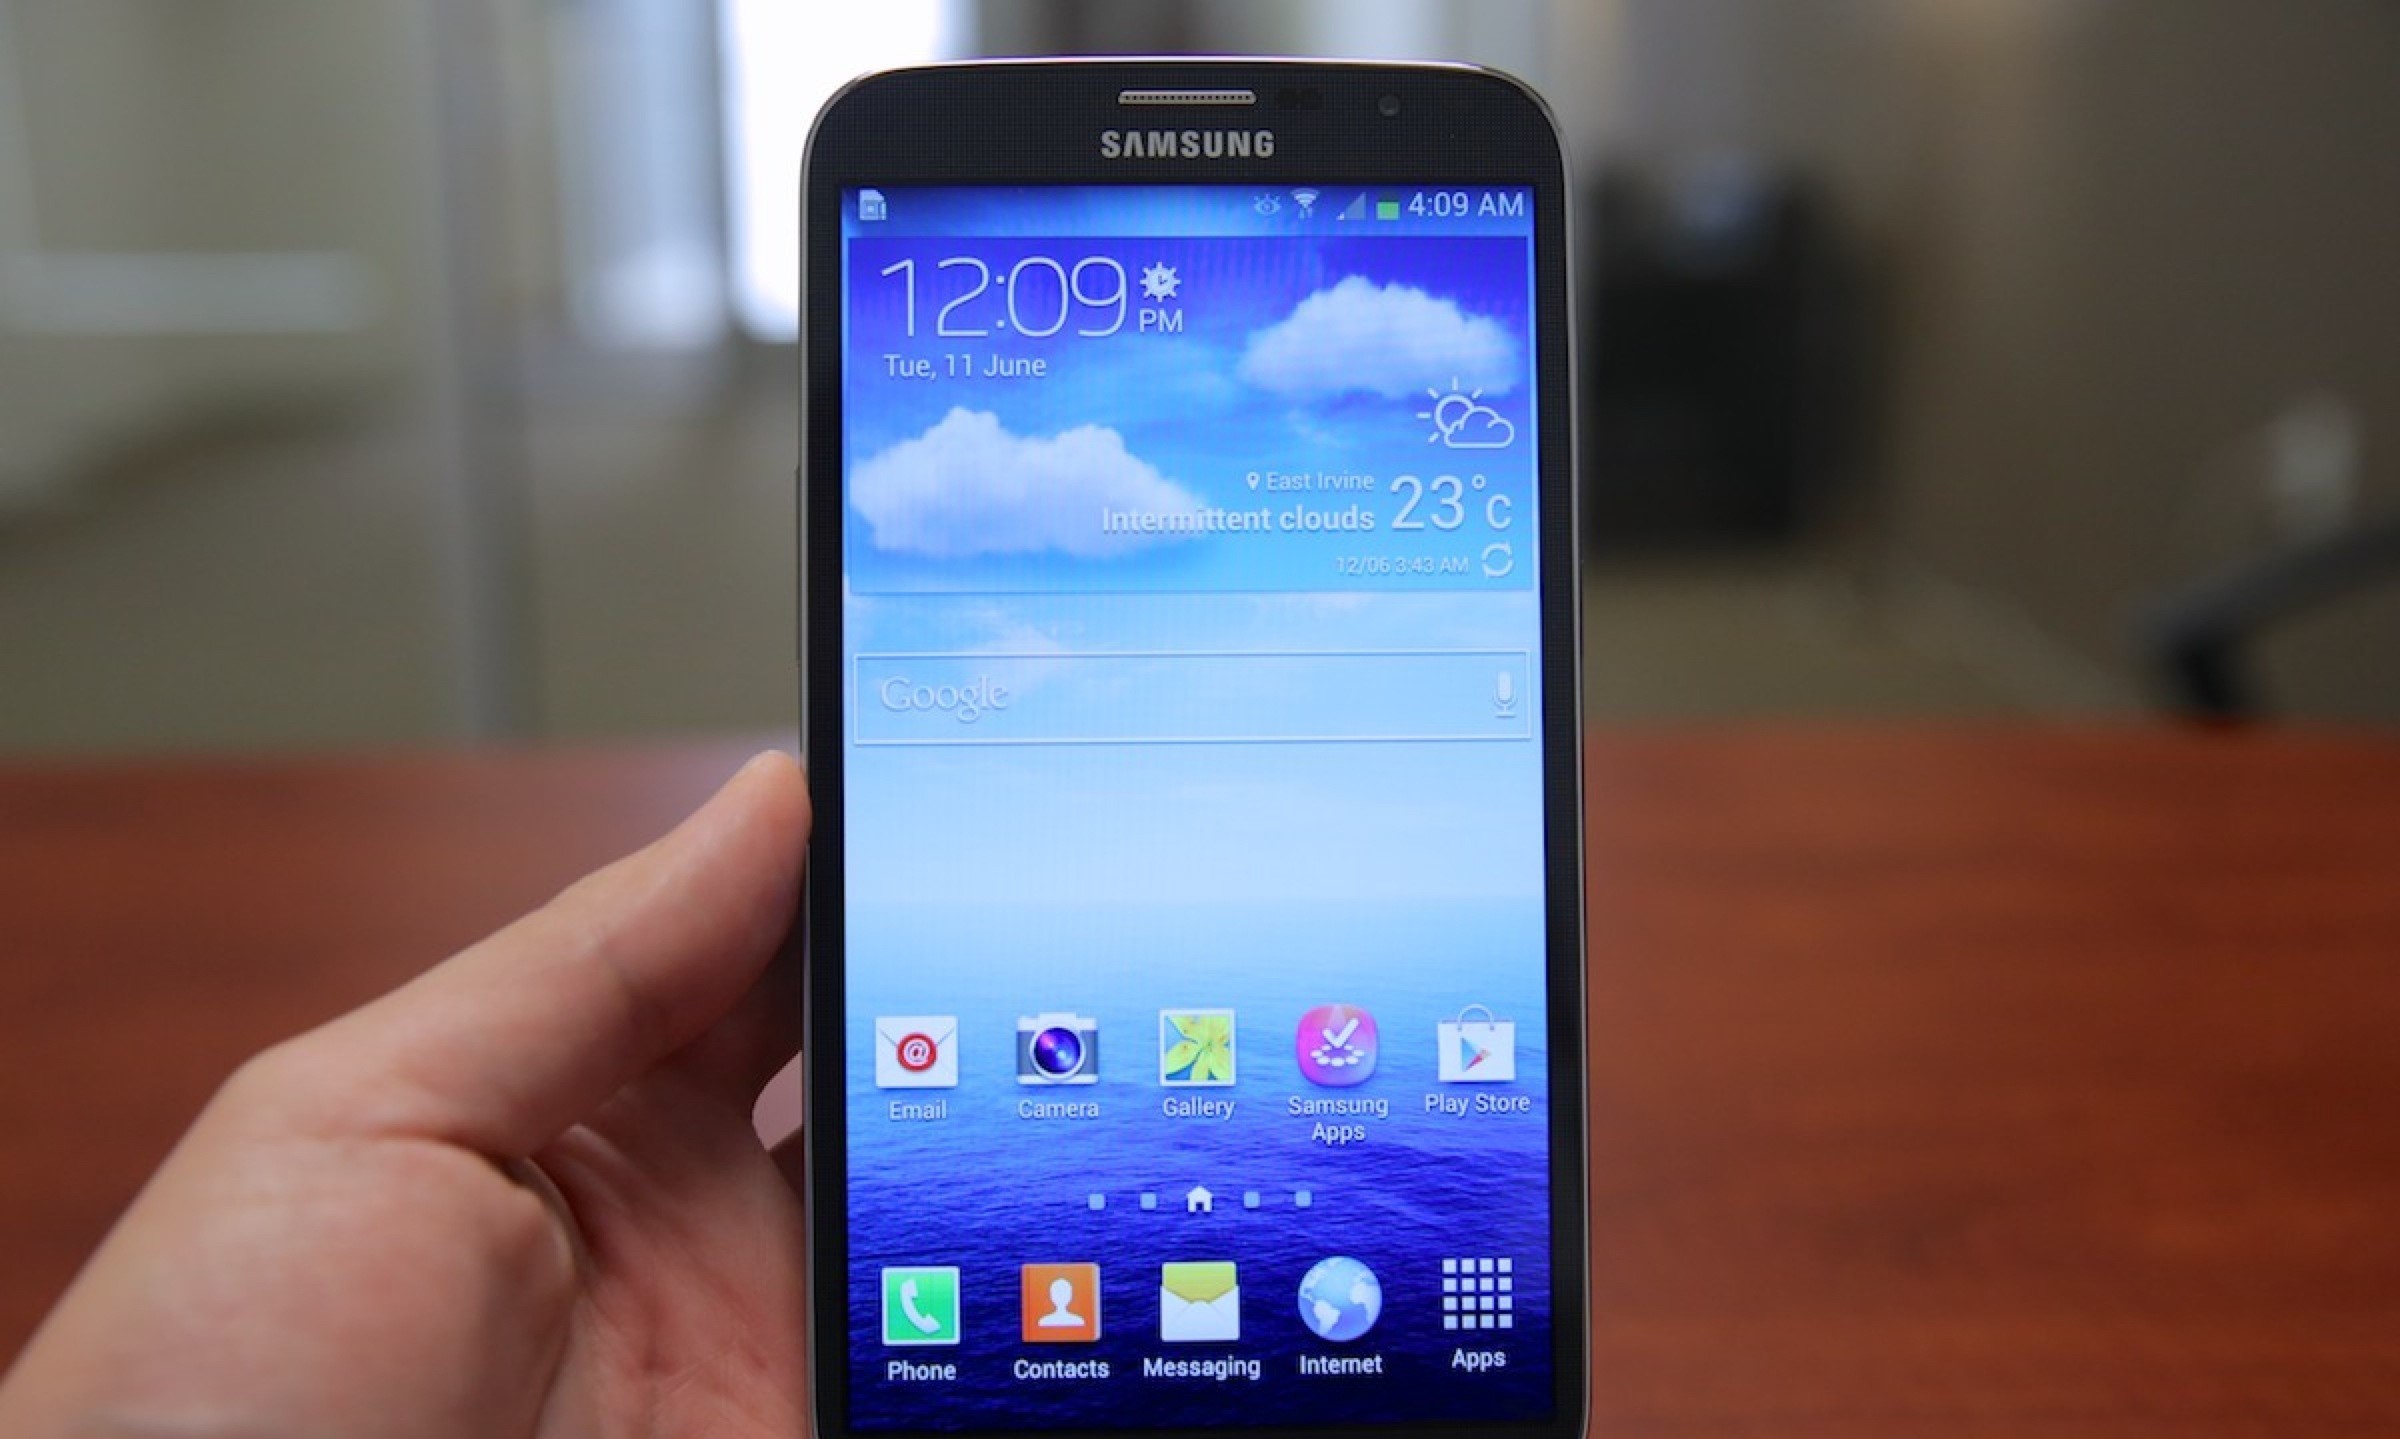 Samsung Galaxy Mega Wallpaper And Image Pictures